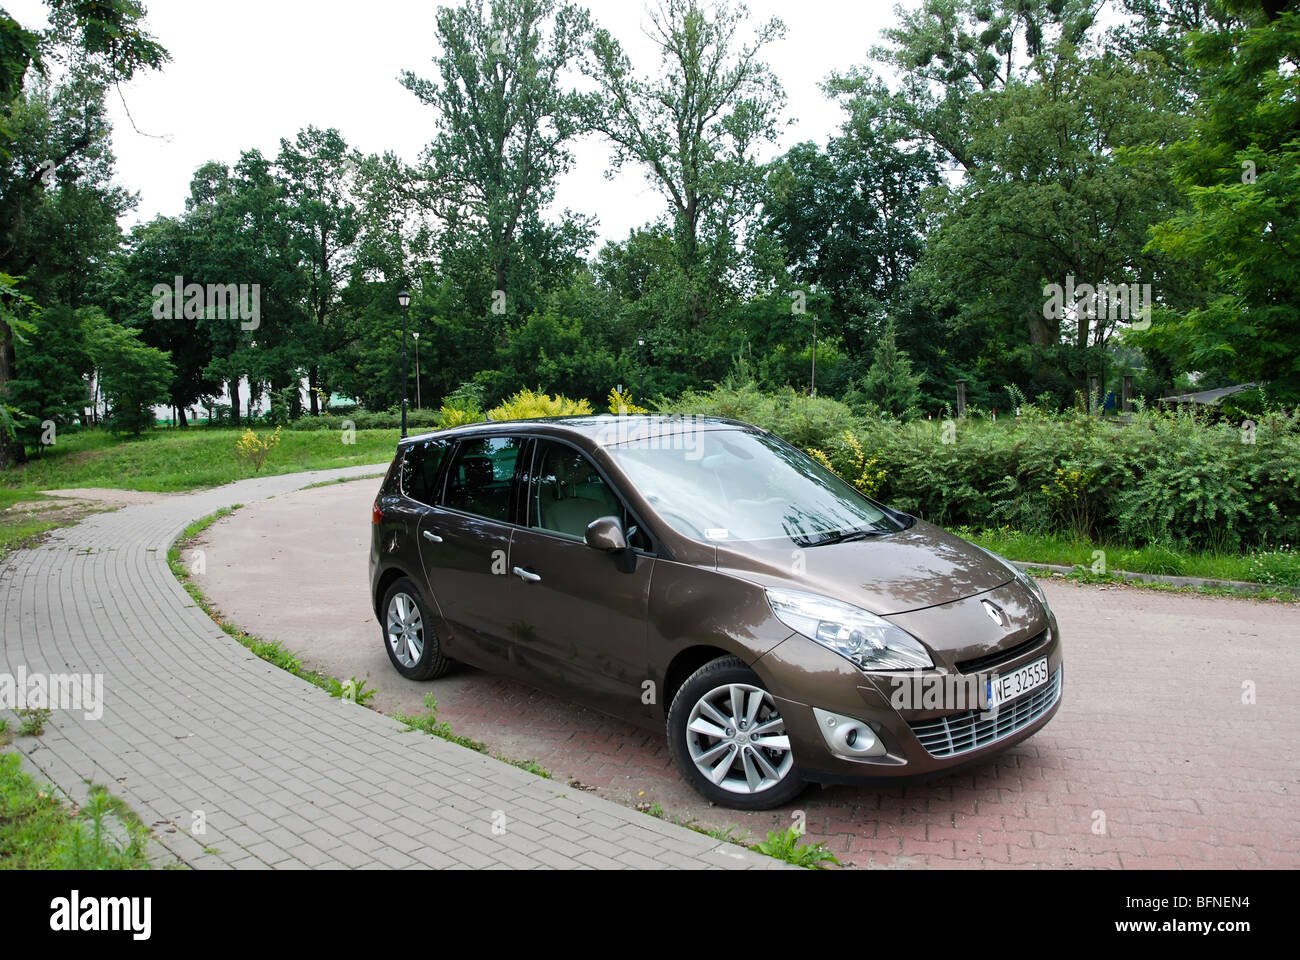 Renault Grand Scenic 1.9 dCi - 2009 - brown metallic - five doors (5D) -  French compact van (MPV) -  small street in a park Stock Photo